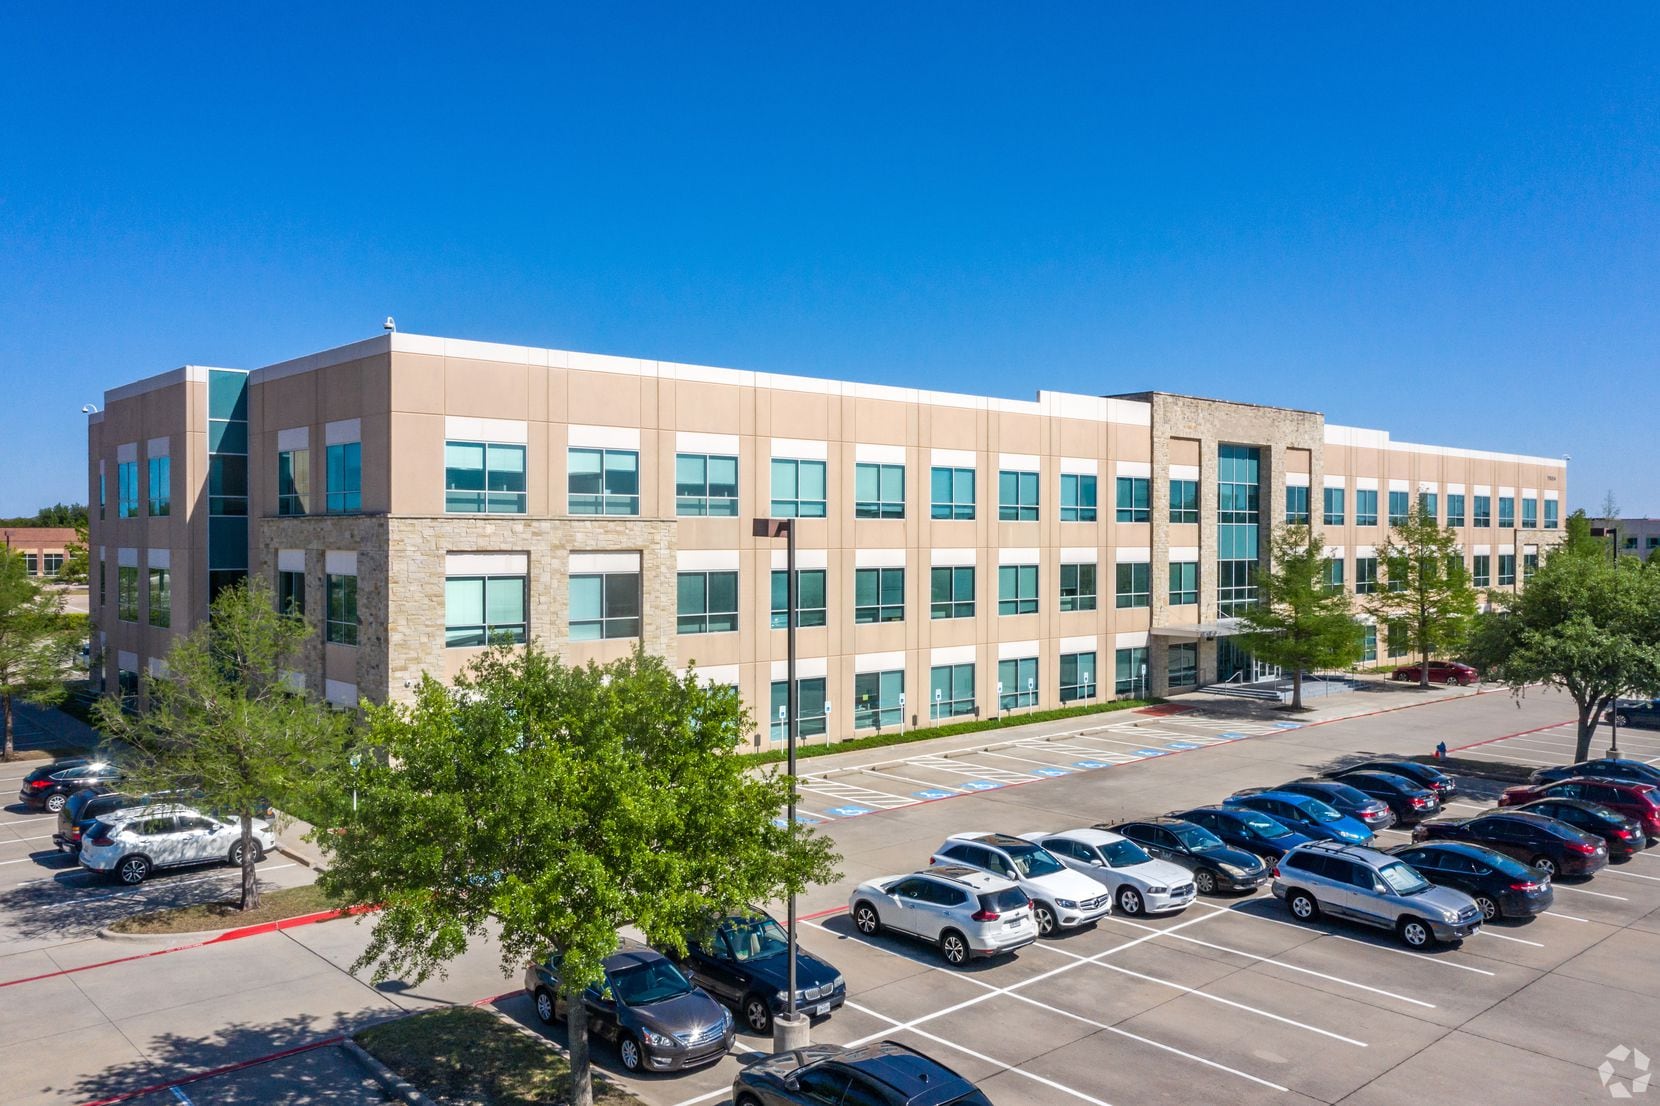 Workspace Property Trust has acquired more than 125,000 square feet at 7624 Warren Parkway...